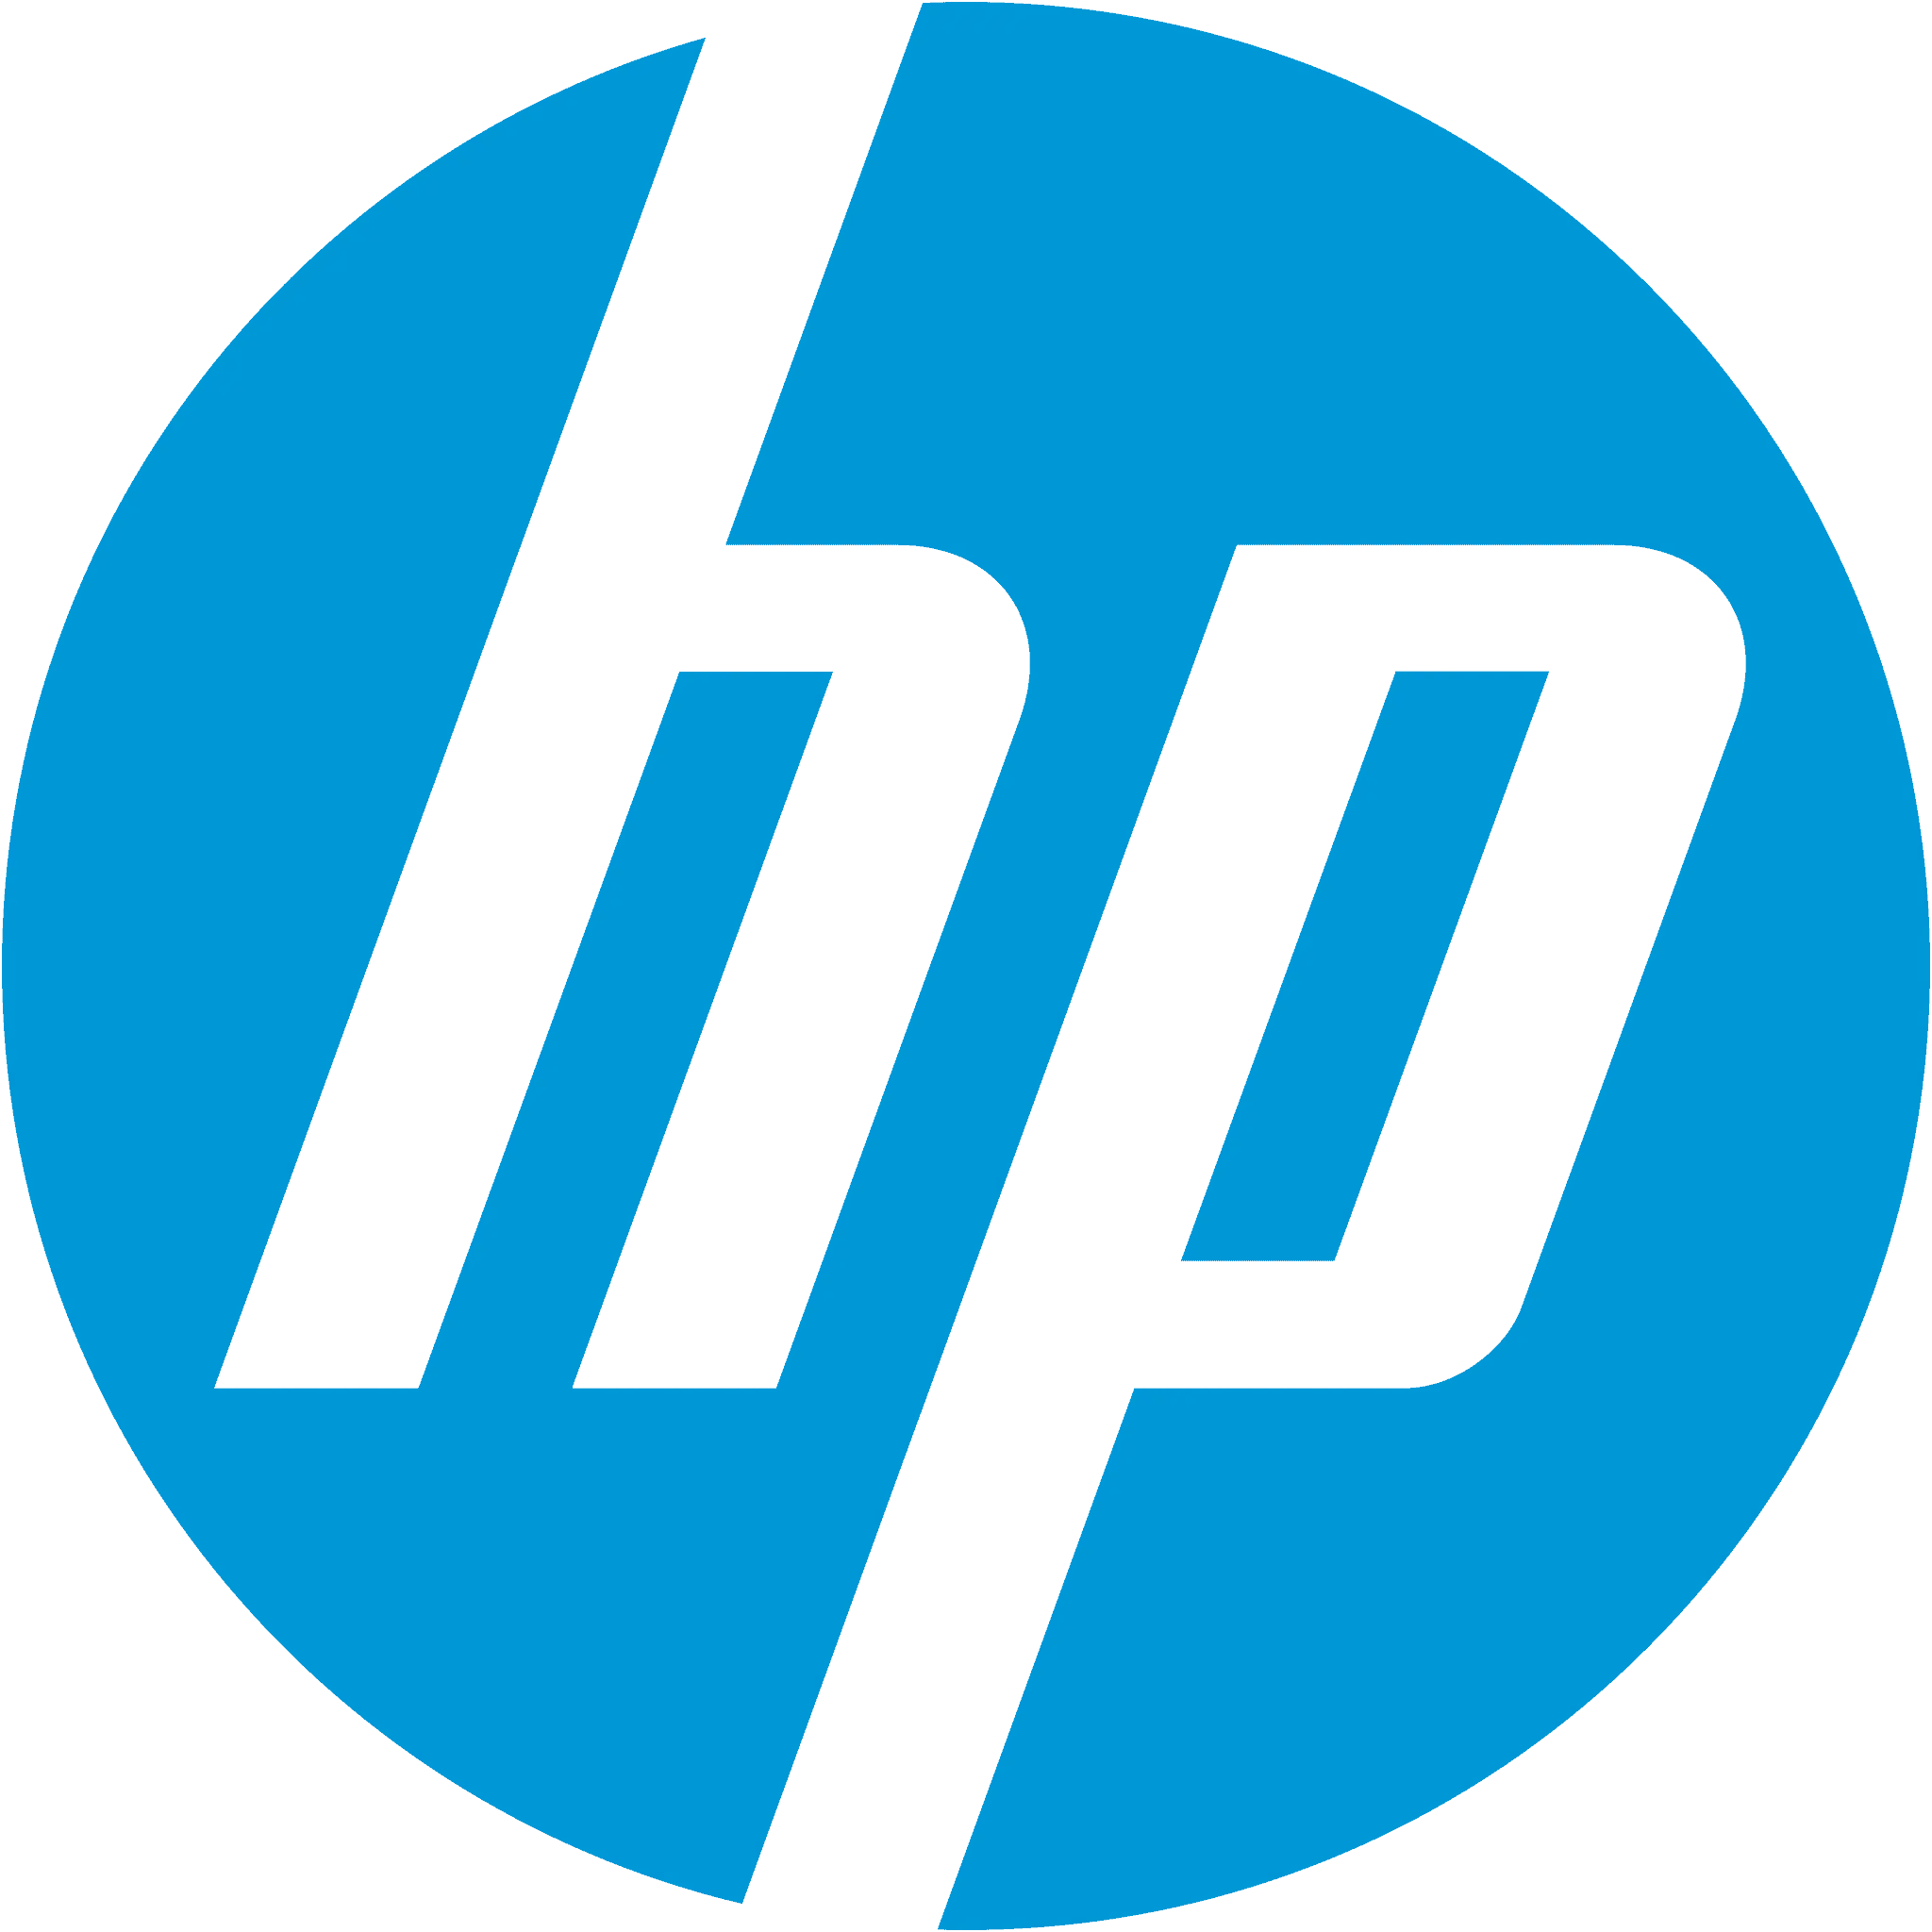 hewlett packard chat support - How do I raise my HP support case